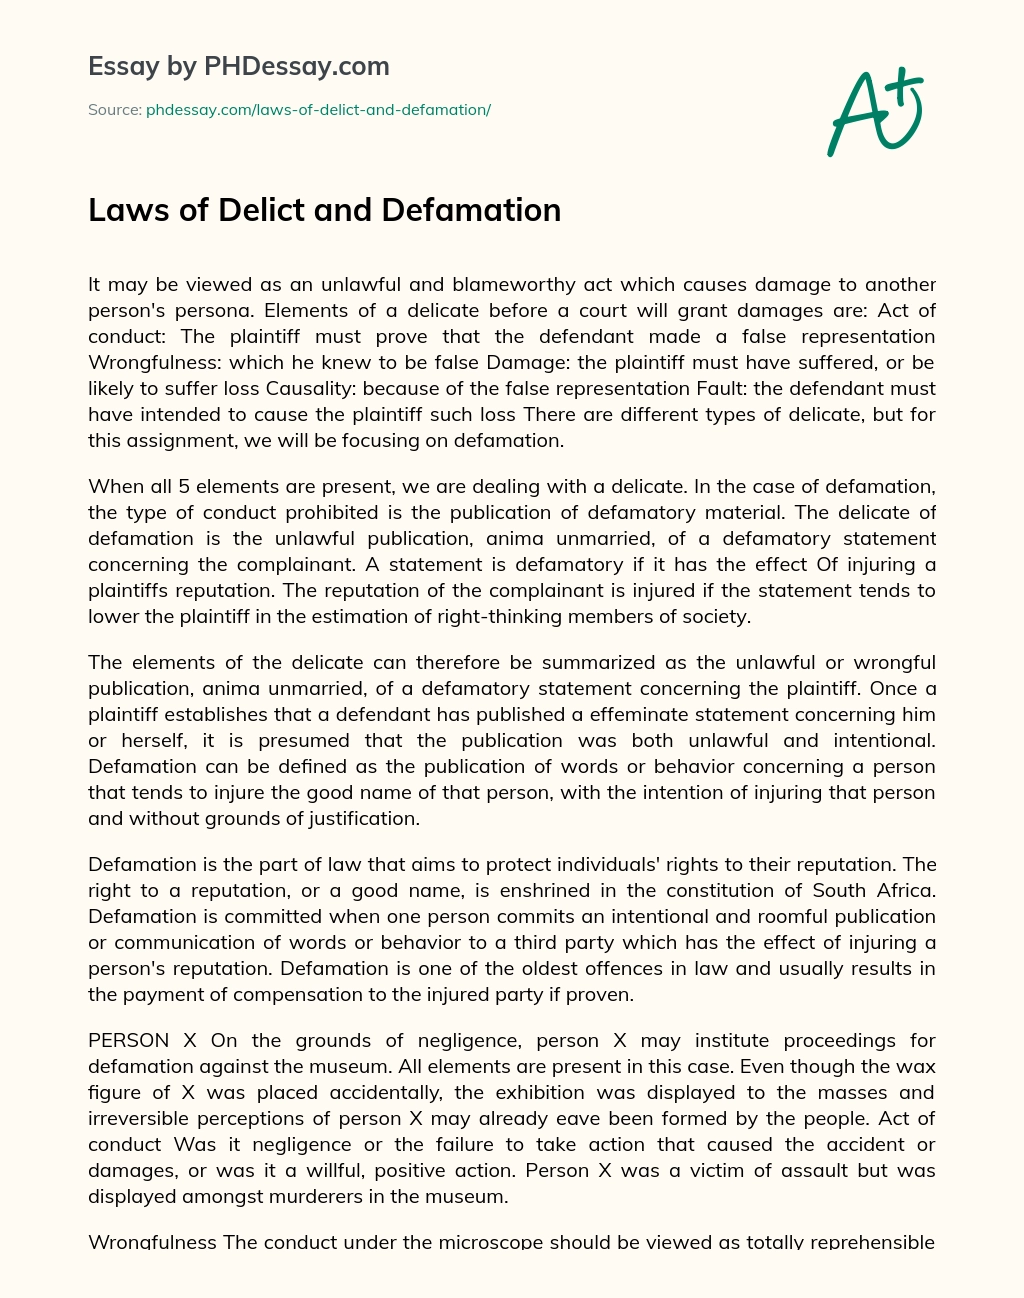 Laws of Delict and Defamation essay